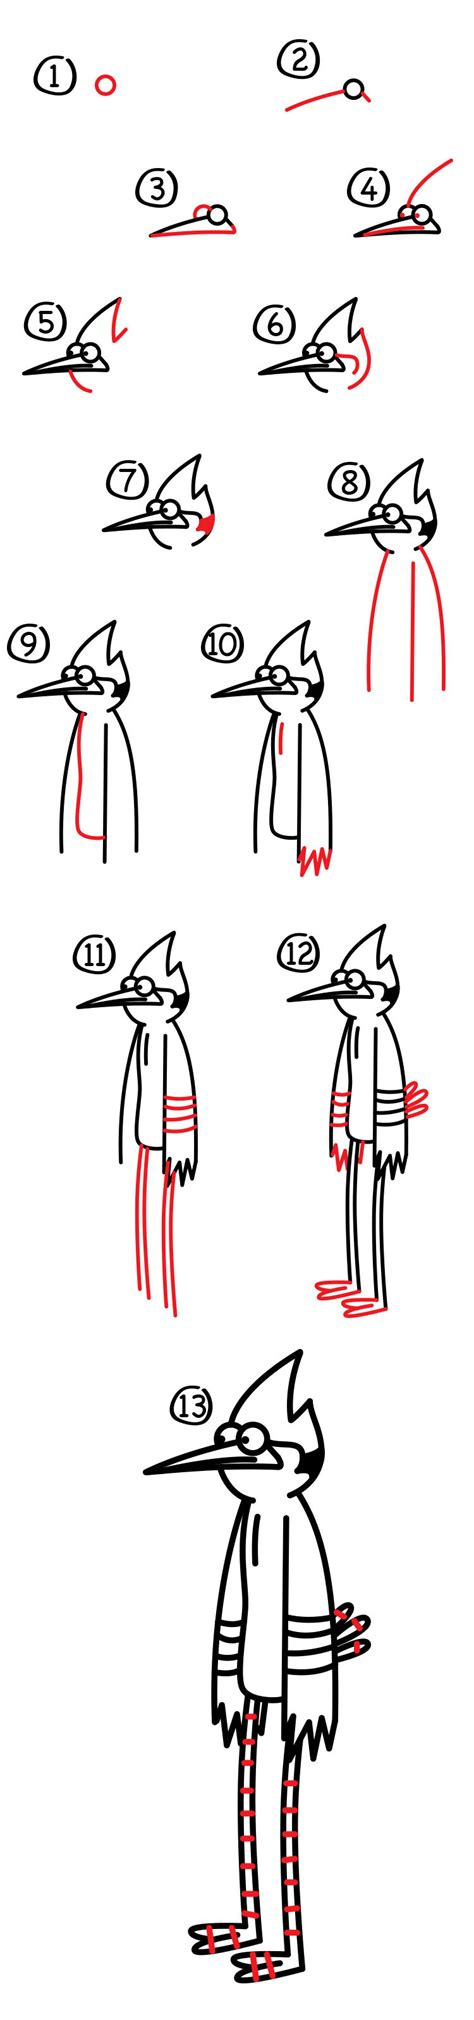 How To Draw Mordecai Regular Show All In One Photos